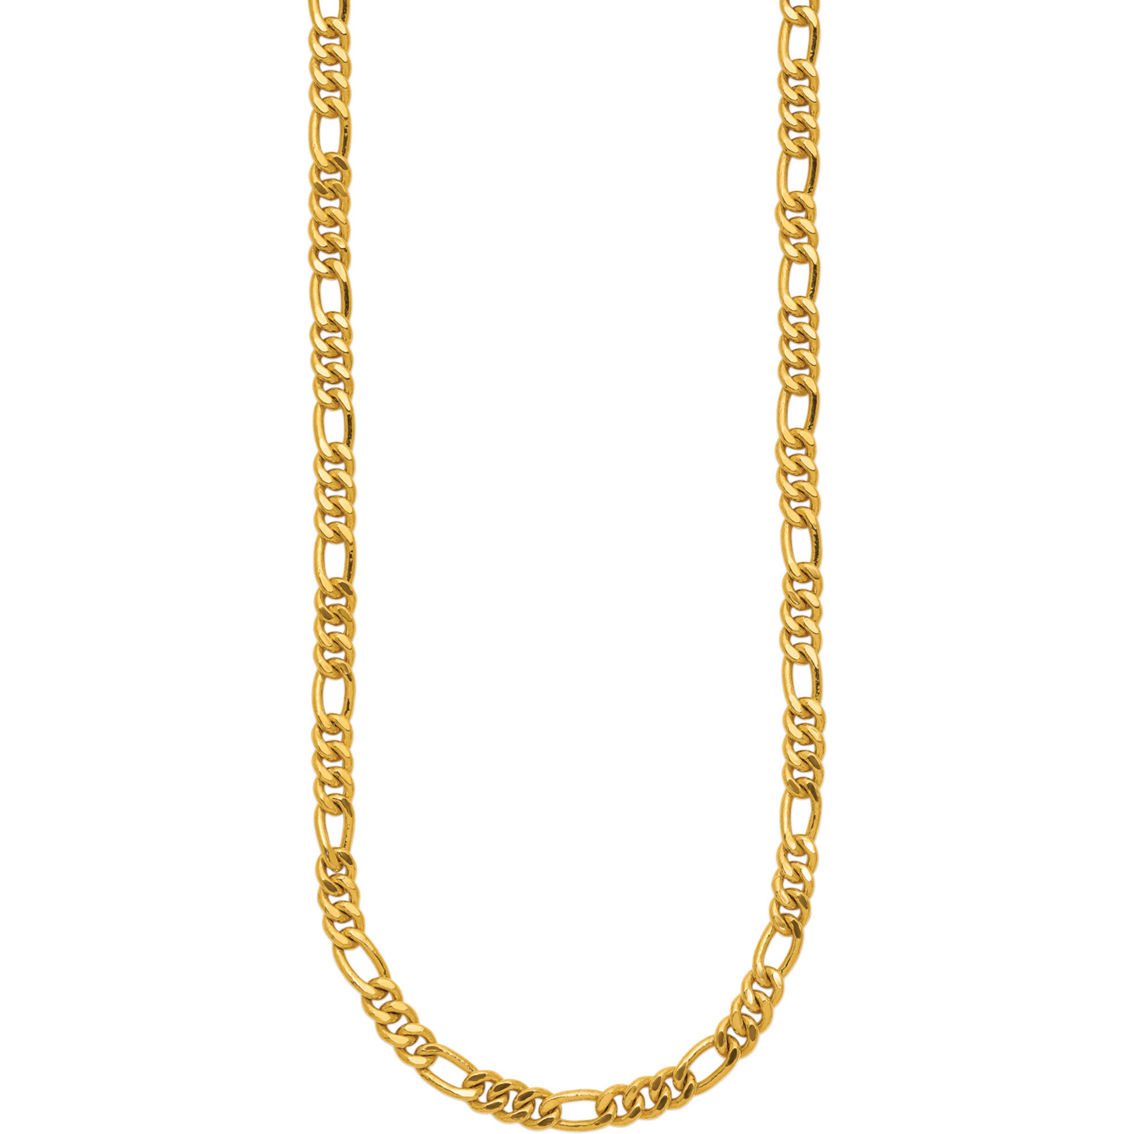 24K Pure Gold 24K Yellow Gold Solid 20 in. Figaro Chain - Image 2 of 5